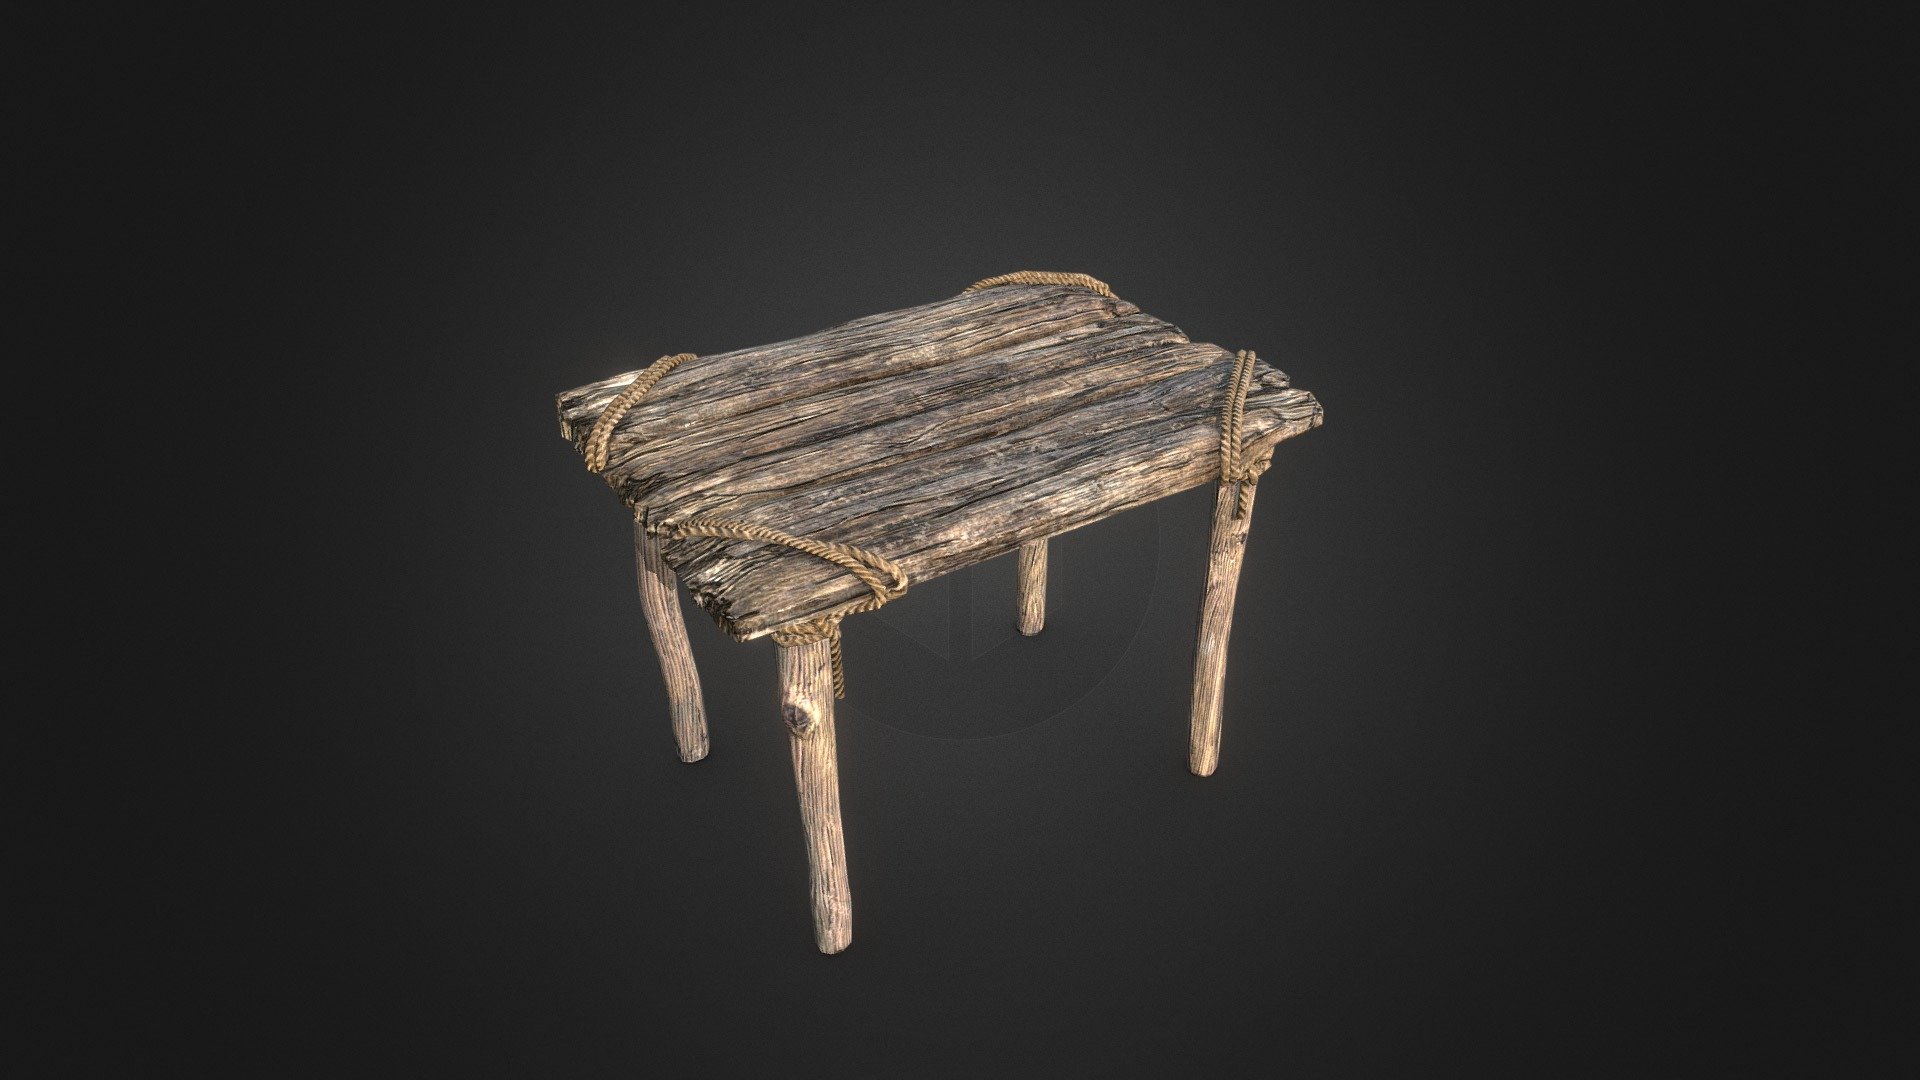 Old table